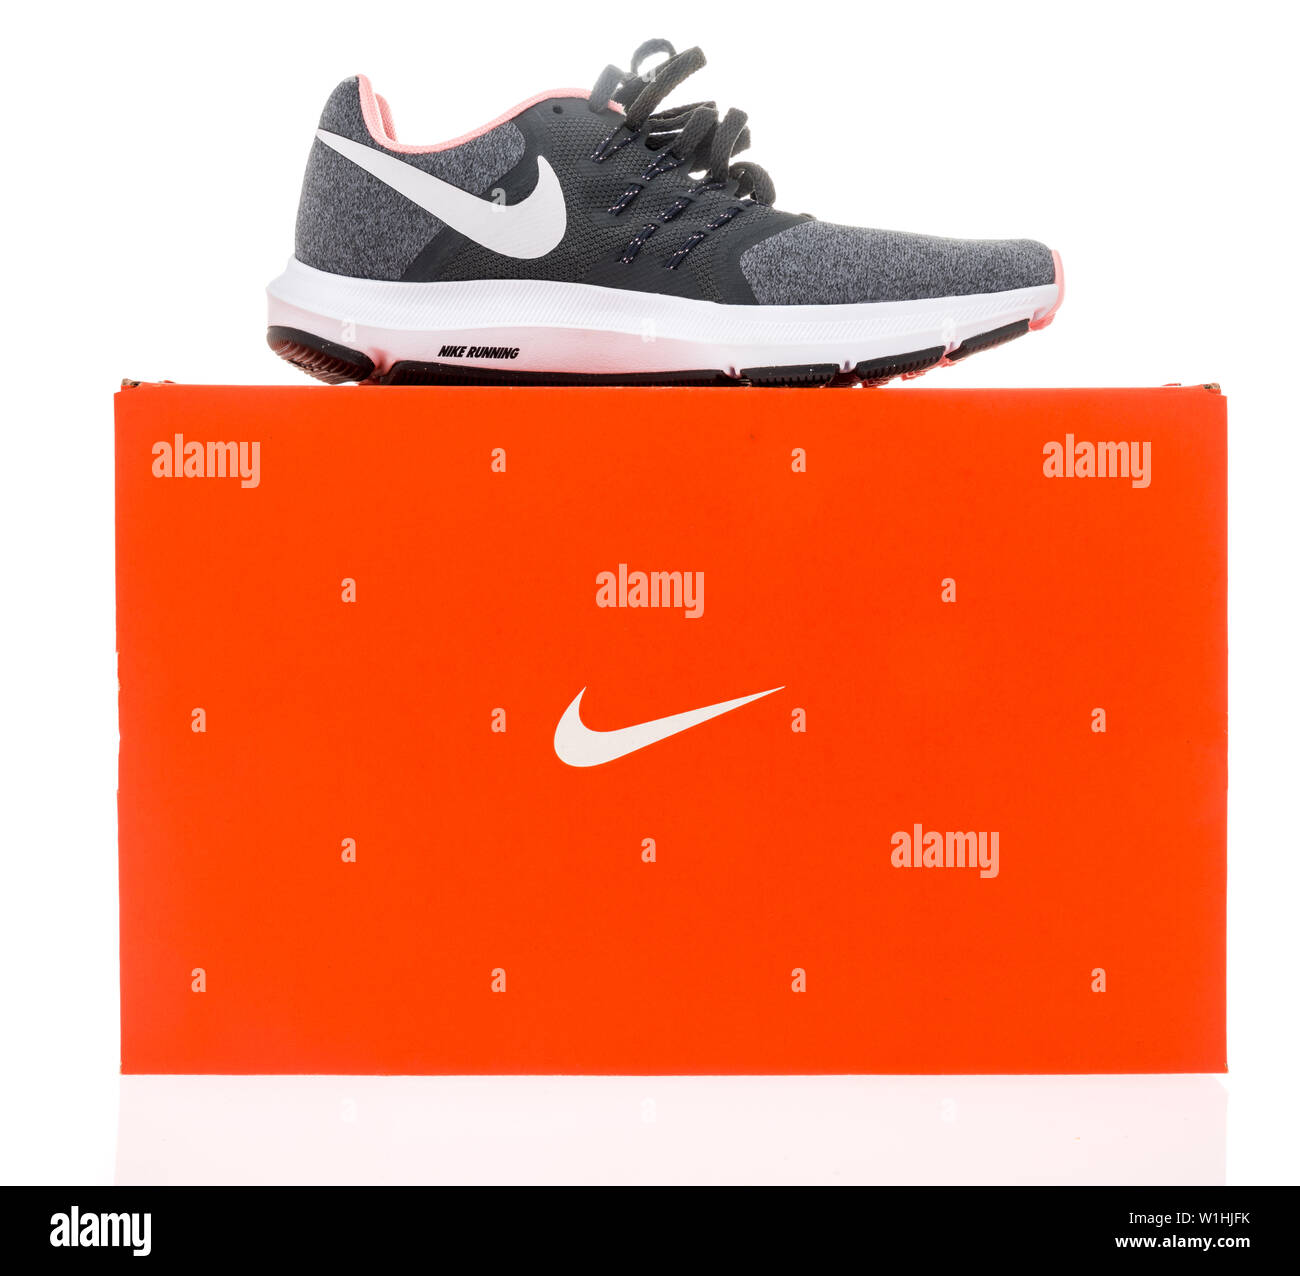 Nike Shoe Box High Resolution Stock Photography and Images - Alamy